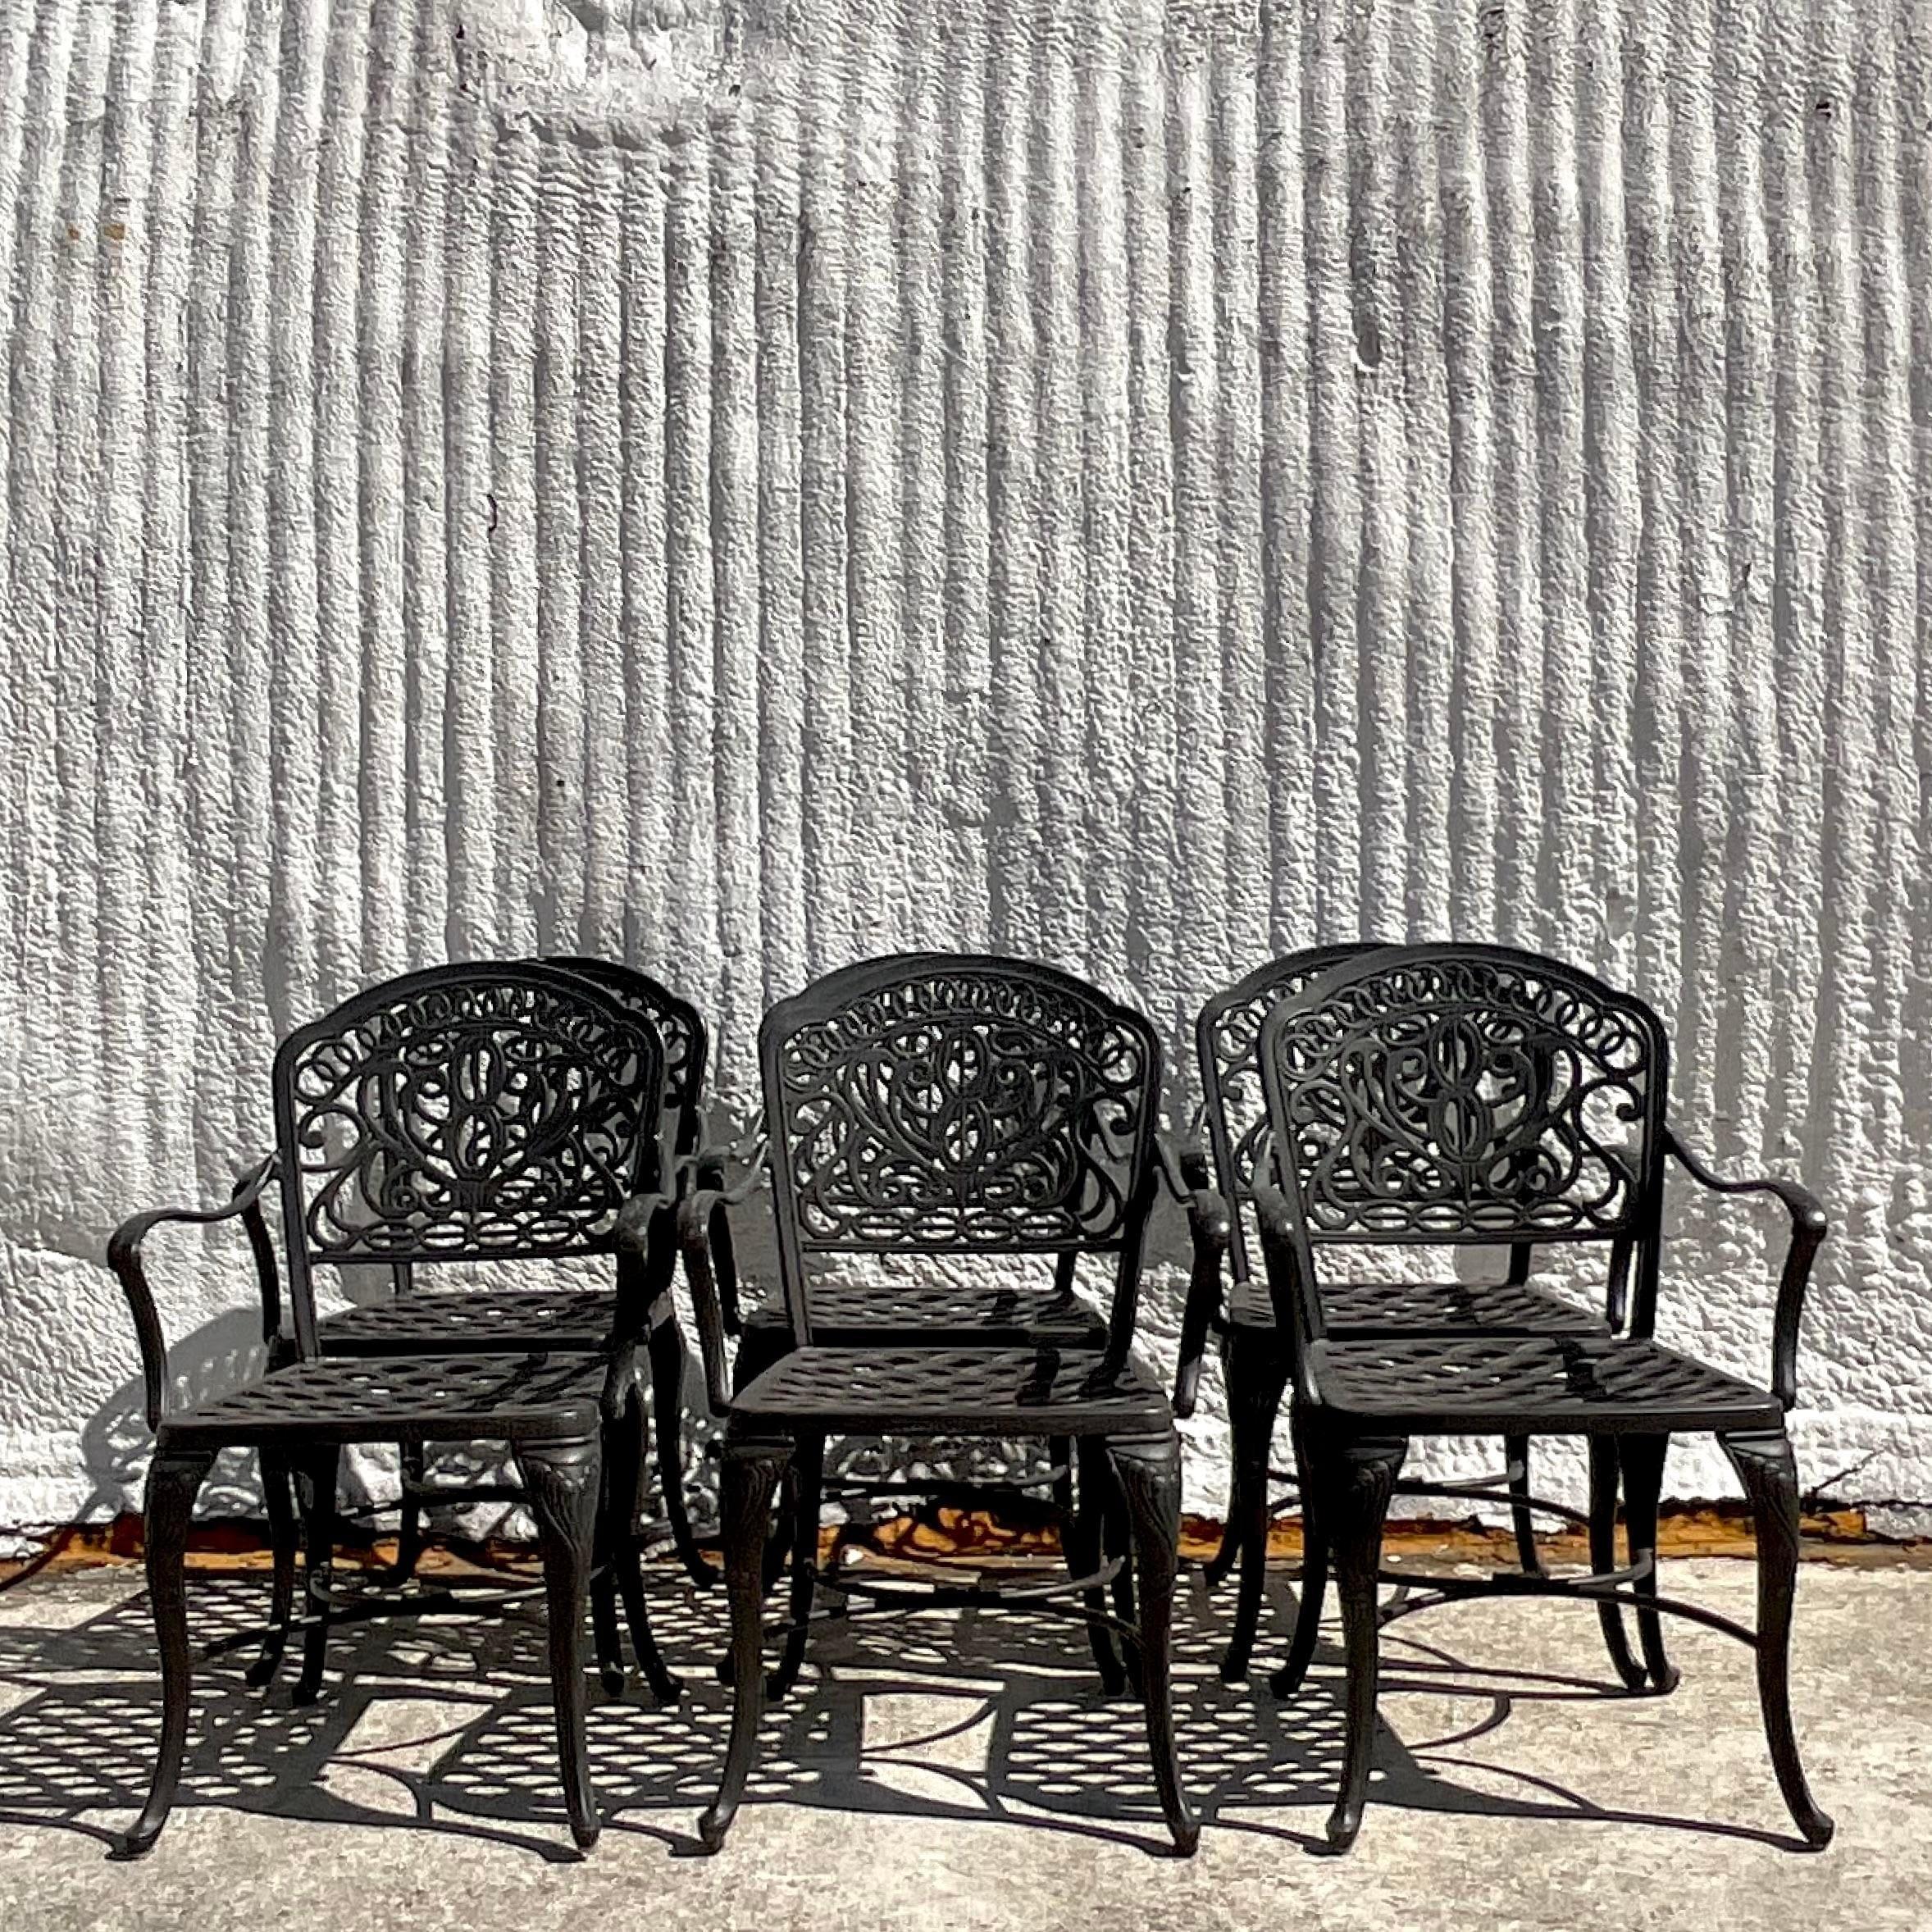 Chinese Vintage Coastal Hanamint Cast Aluminum Outdoor Dining Chairs - Set of 6 For Sale